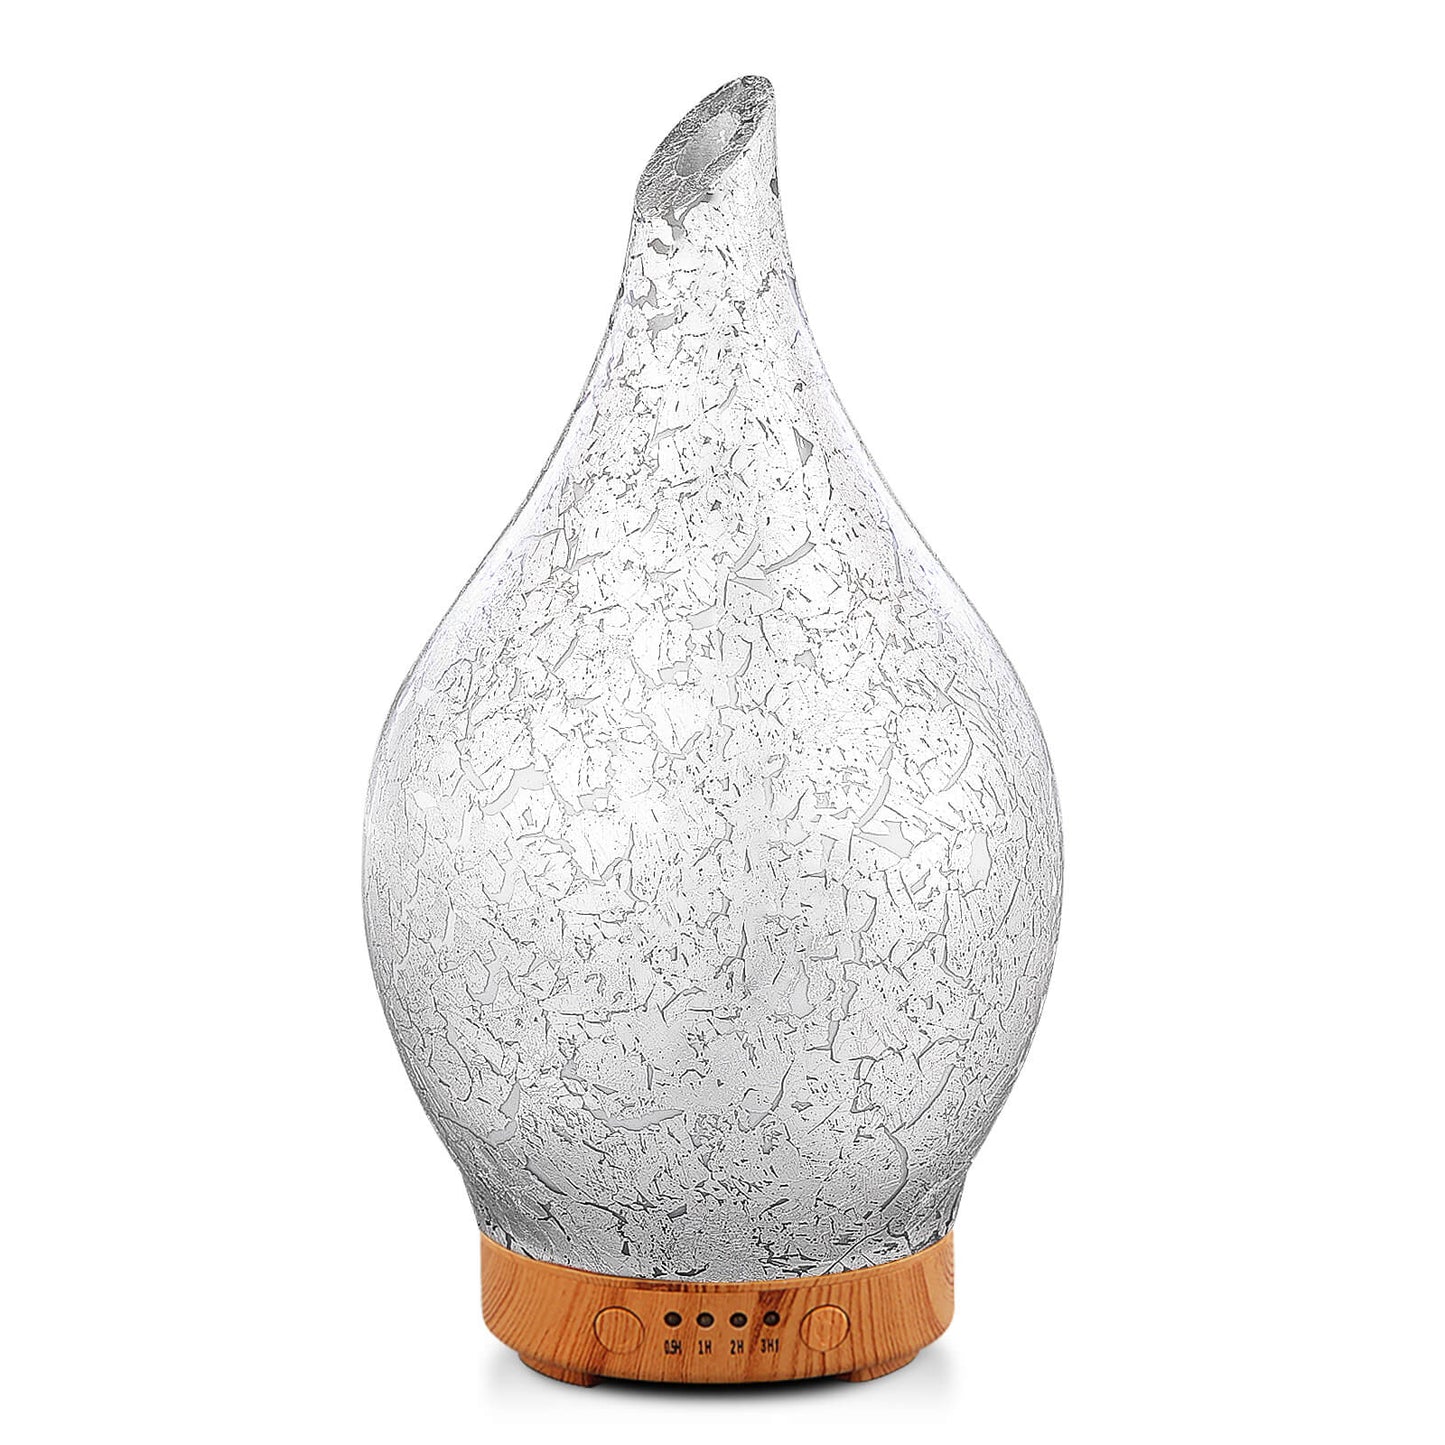 Essential Oil Diffuser Aromatherapy Diffusers for Therapeutic Oils - Ultrasonic Vase Cover & Special Silver,Cool Mist,Air Humidifier for Home, Office, Spa,Gym